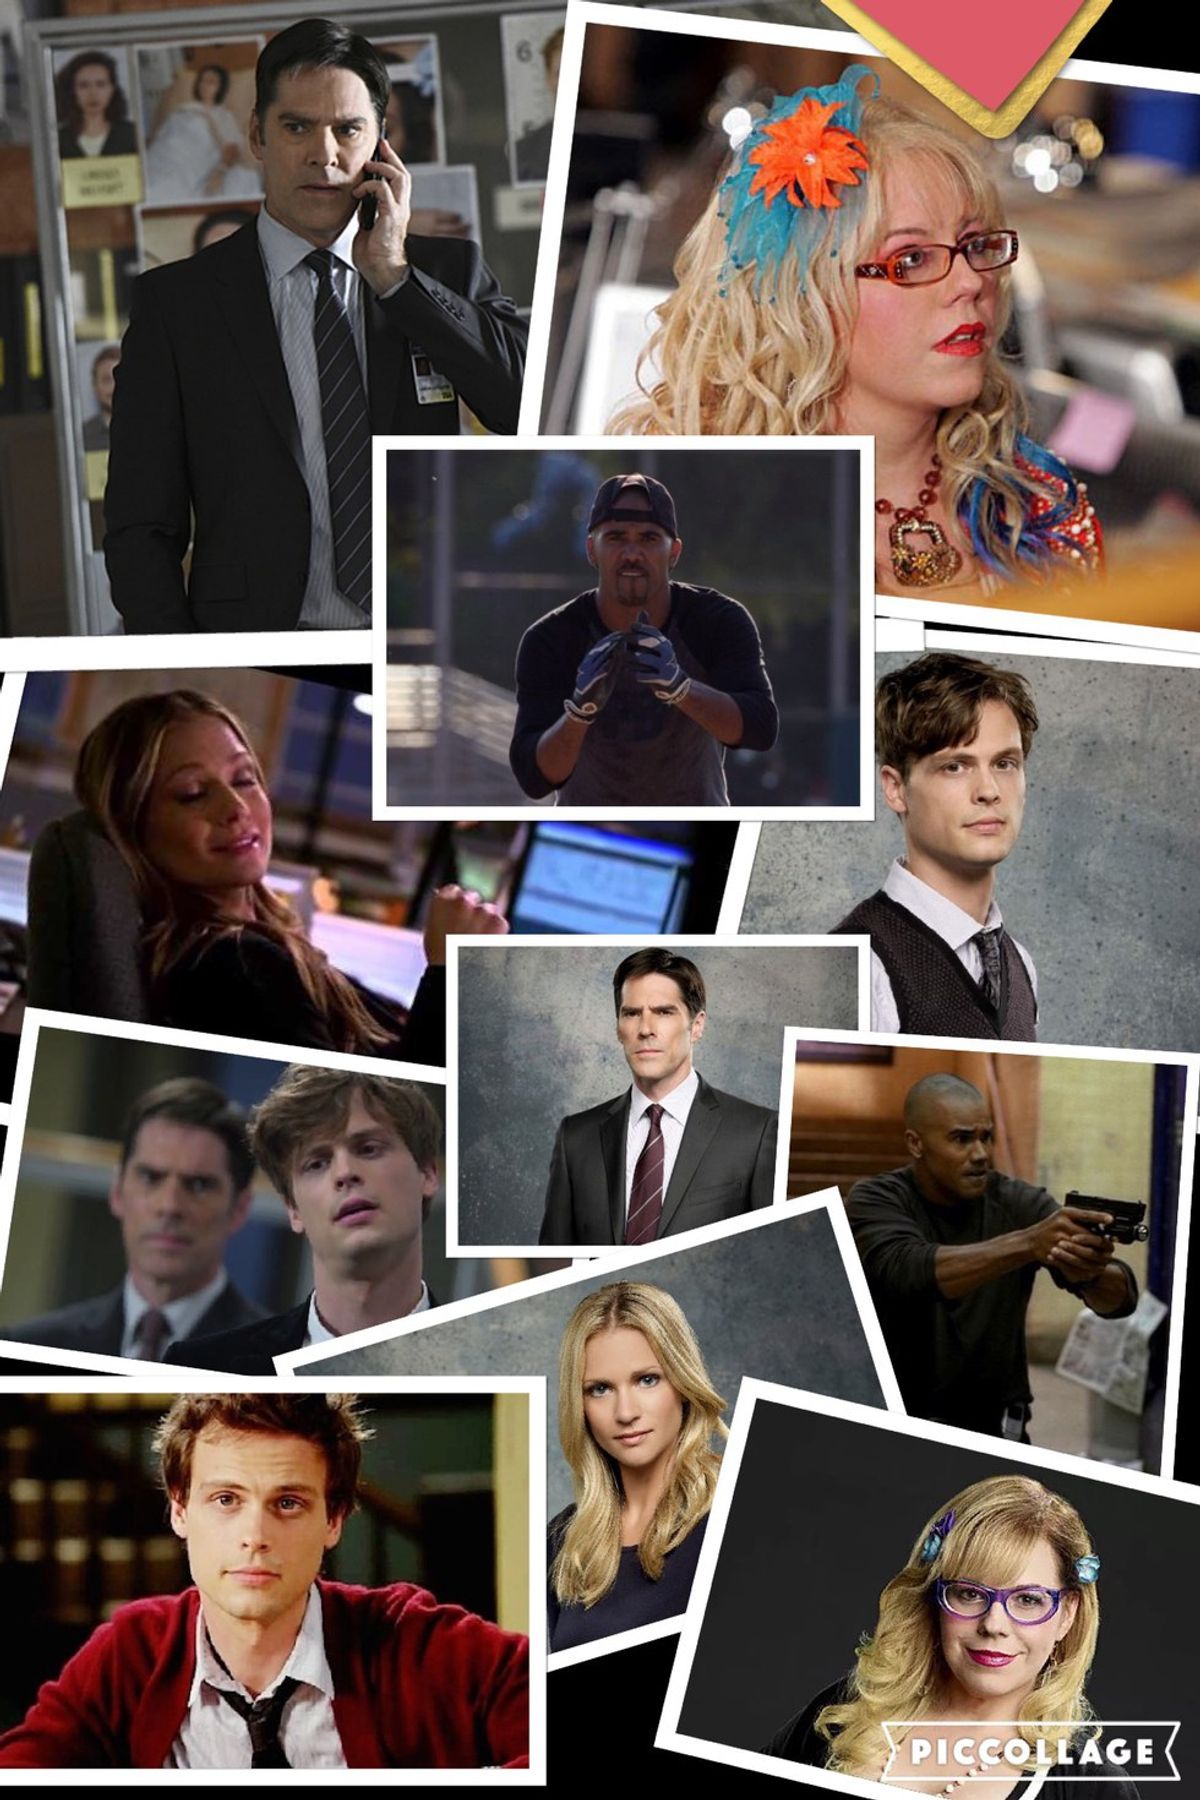 Days Of The Week, As Told By 'Criminal Minds'